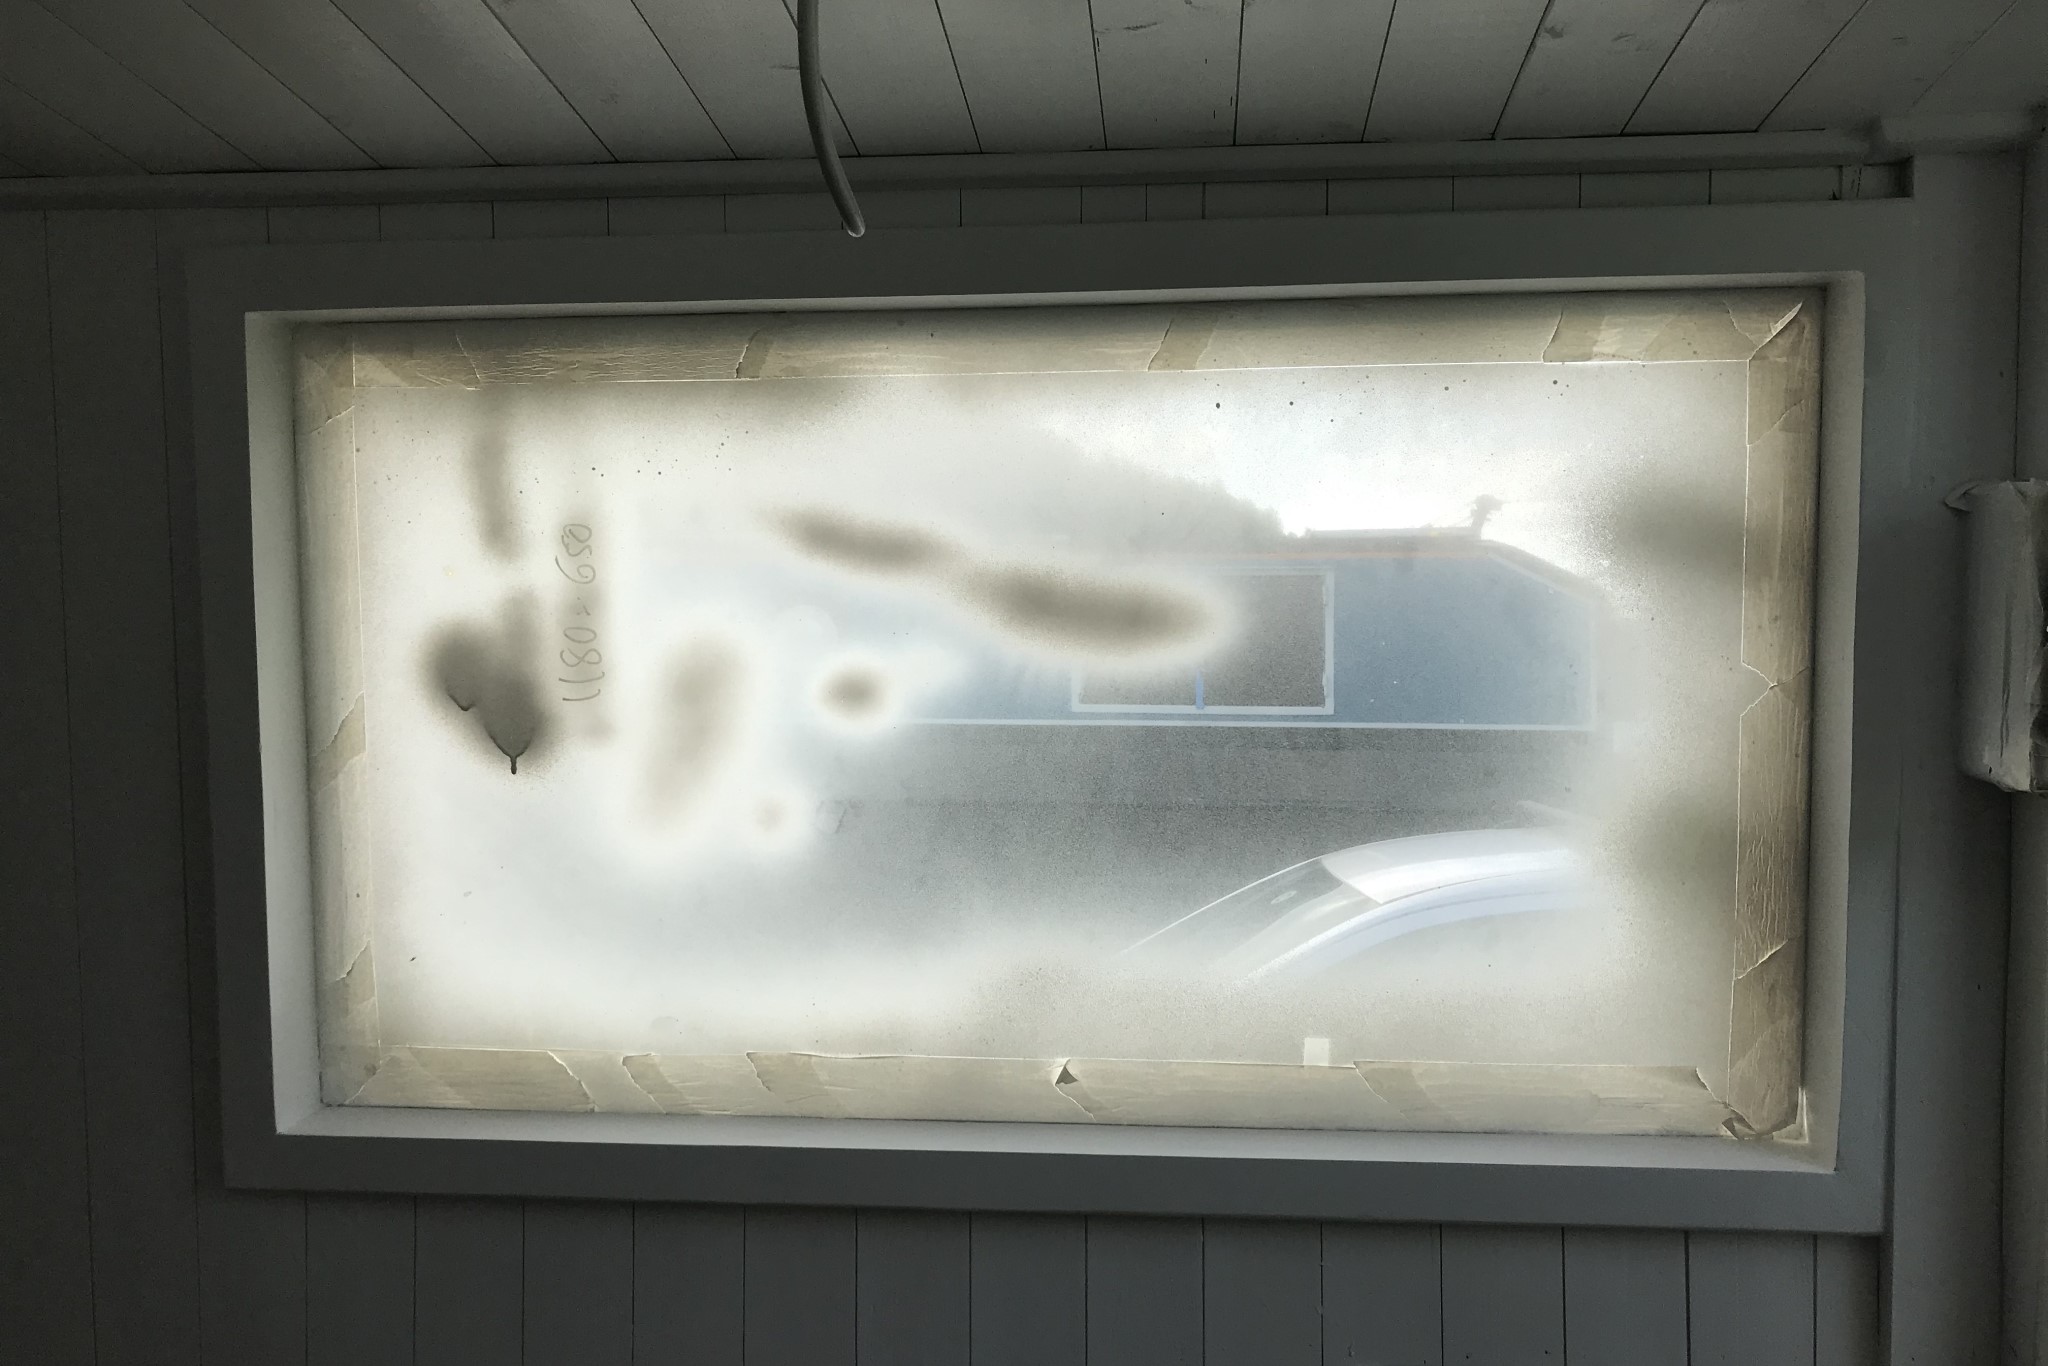 A window in the boat with protective tape around the edges to protect it from paint. The paint is all over the window and the tape has done nothing to protect it.